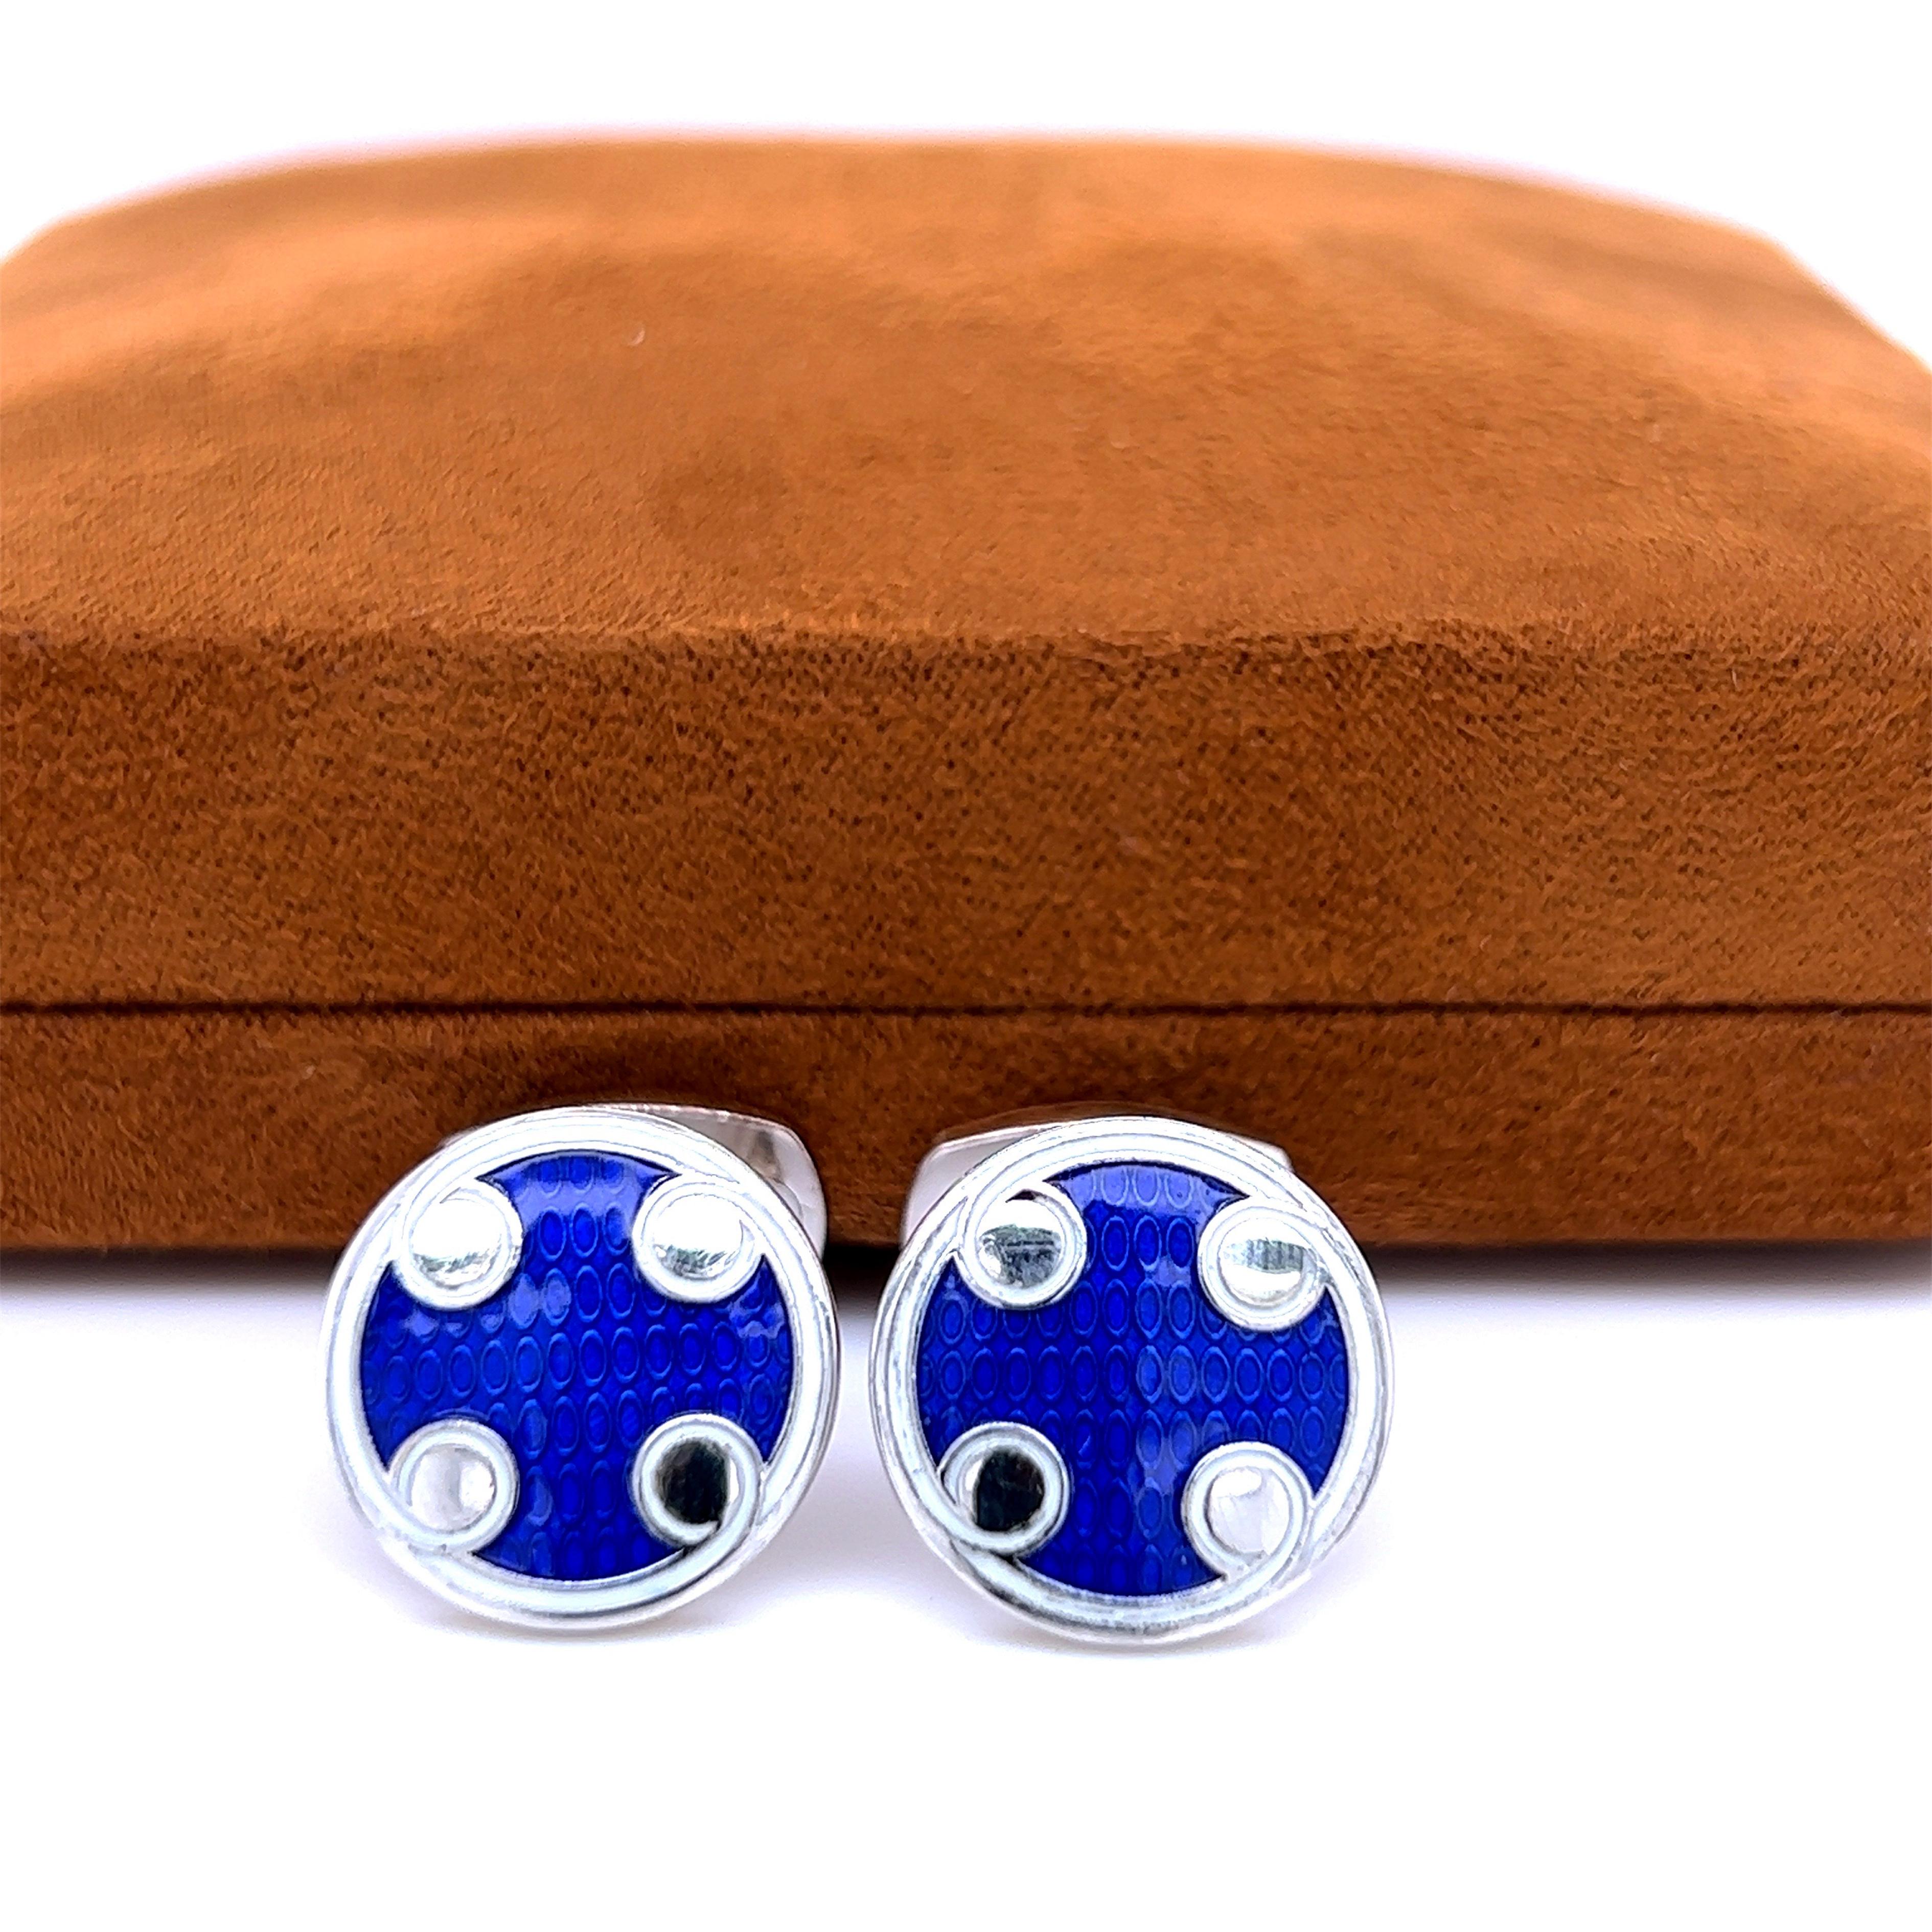 Unique, absolutely Chic yet Timeless White, Navy Blue Hand Enamelled Round Disk Shaped Sterling Silver Setting Cufflinks.
In our fitted Tobacco Suede Leather Case and Pouch.